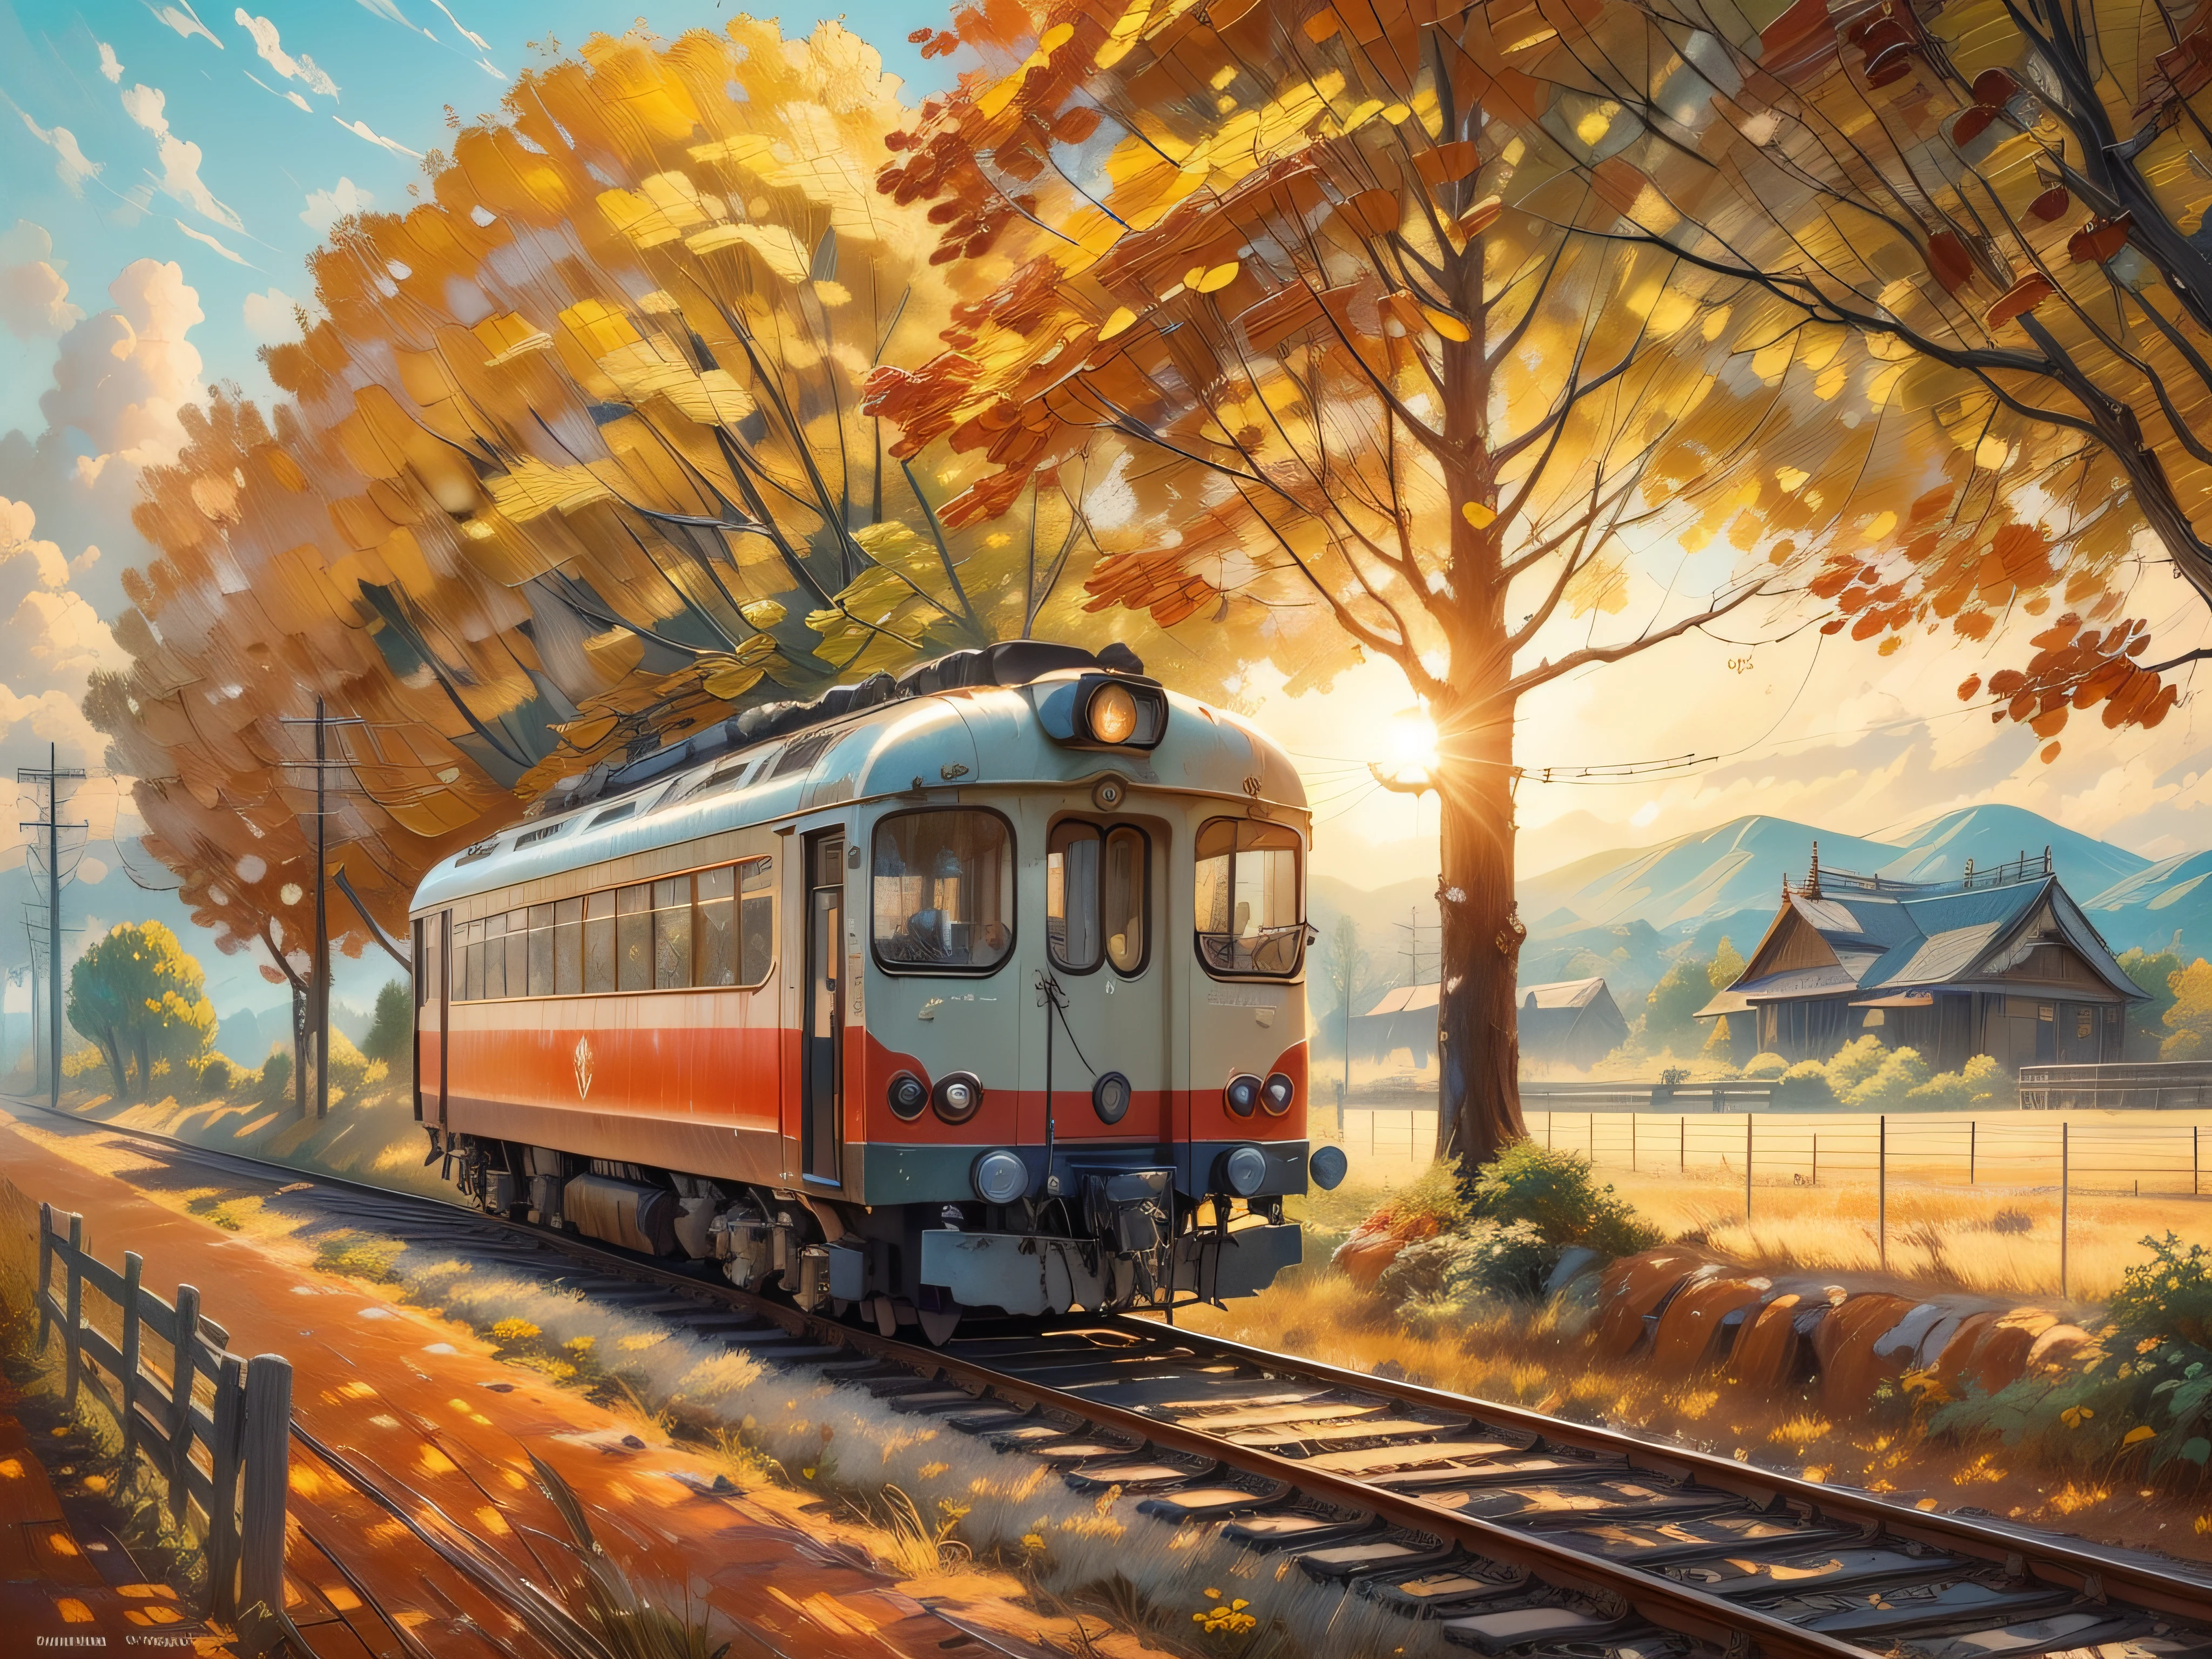 (((masterpiece))), high quality, extremely detailed, Japanese Old Single Carriage Train, Rural Station, sunlight, morning, sunrise, autumn landscape, super fine illustration, (((oil painting))), real photo, line art, approaching perfection, insanely detailed, concept art, epic, cinematic,